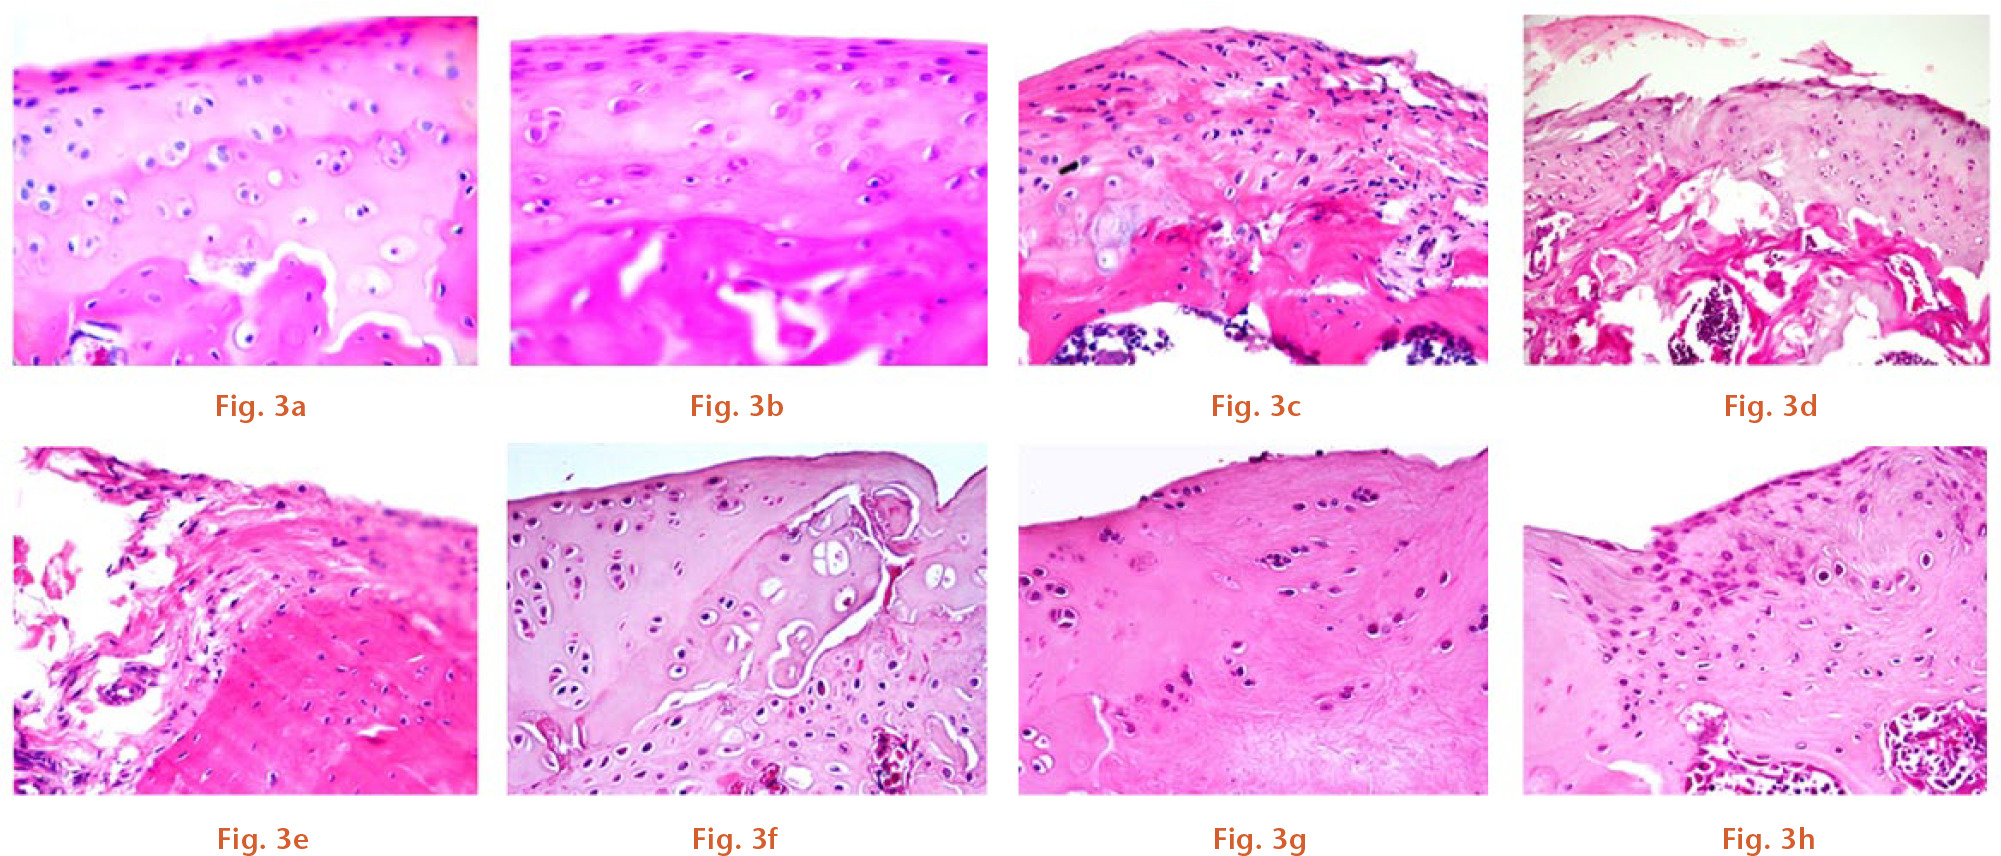  
            Histopathological evaluation of representative haematoxylin and eosin (H&E) staining sections of articular cartilage from the rat femoral condyle in the (a) naïve and (b) sham groups at 12 weeks post-surgery, and in the (c to e) anterior cruciate ligament transection (ACLT) and (f to h) osteochondral injury groups at four, eight and 12 weeks post-surgery, respectively (original magnification, x 100).
          